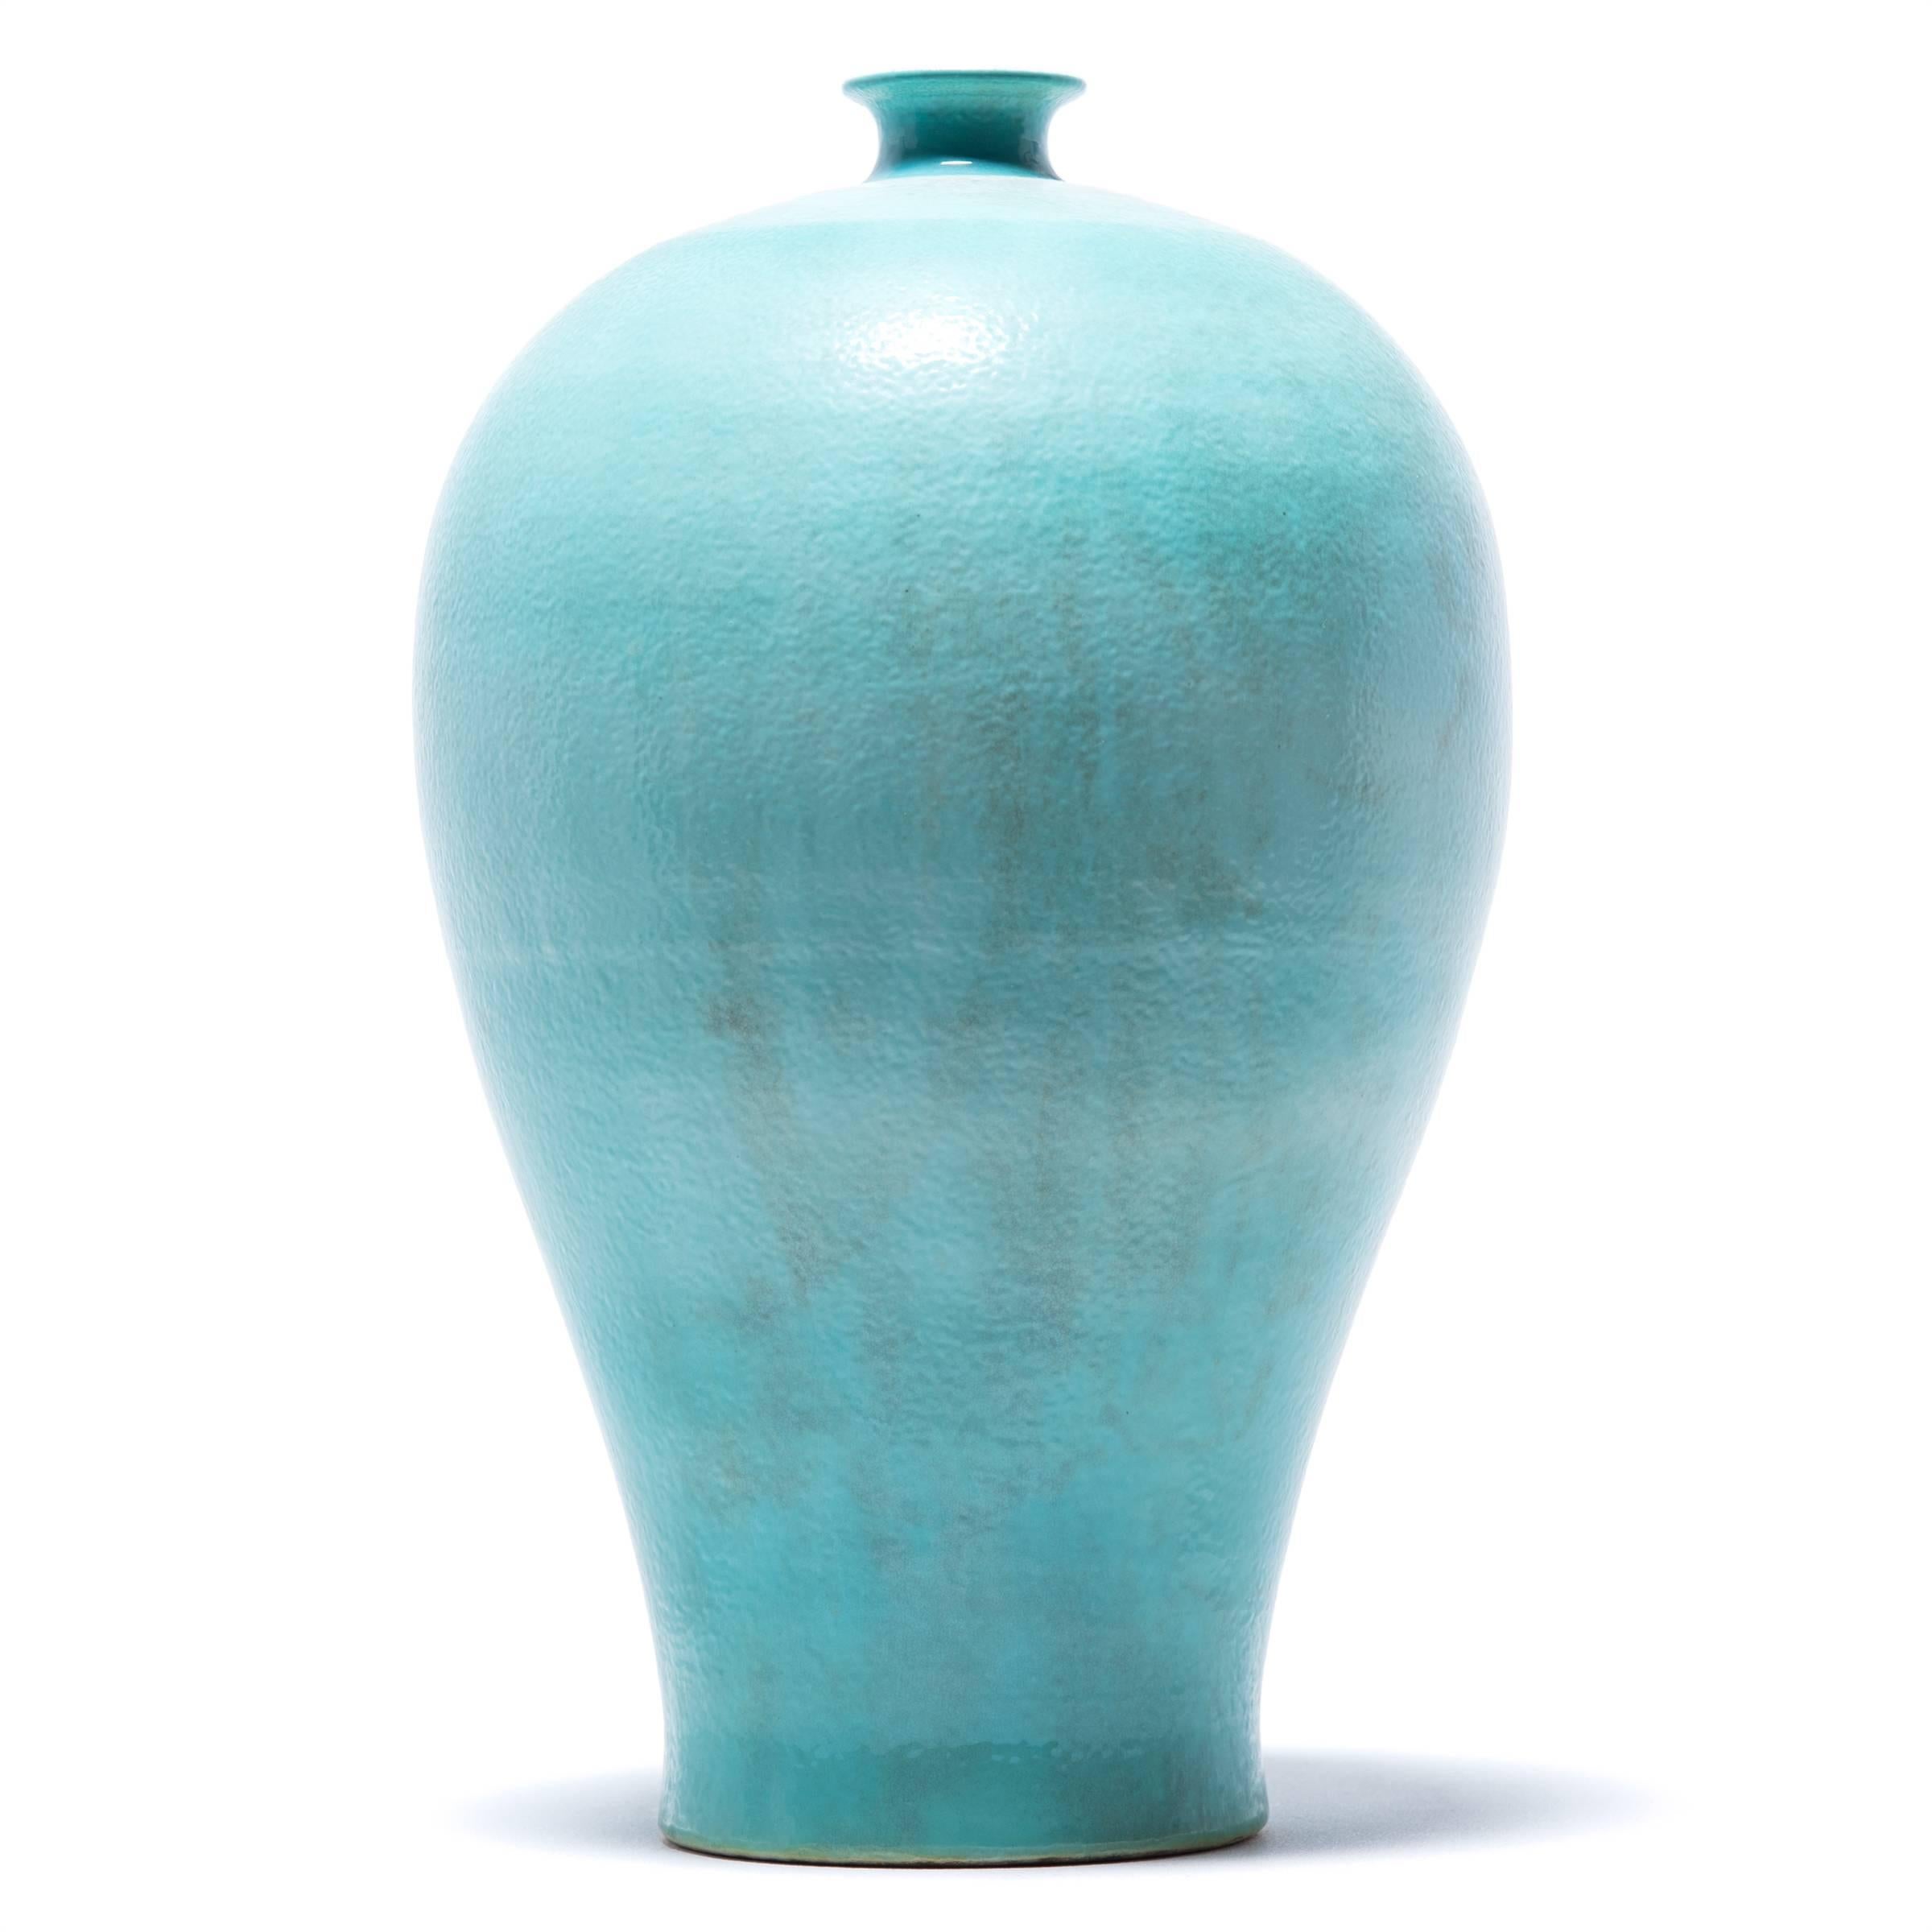 Meiping vases were traditionally used to hold the branches of plum trees, celebrated in China as symbols of strength. Glazed in arch jade color, this contemporary vase was made in Southern China using ancient techniques rooted in the Song dynasty